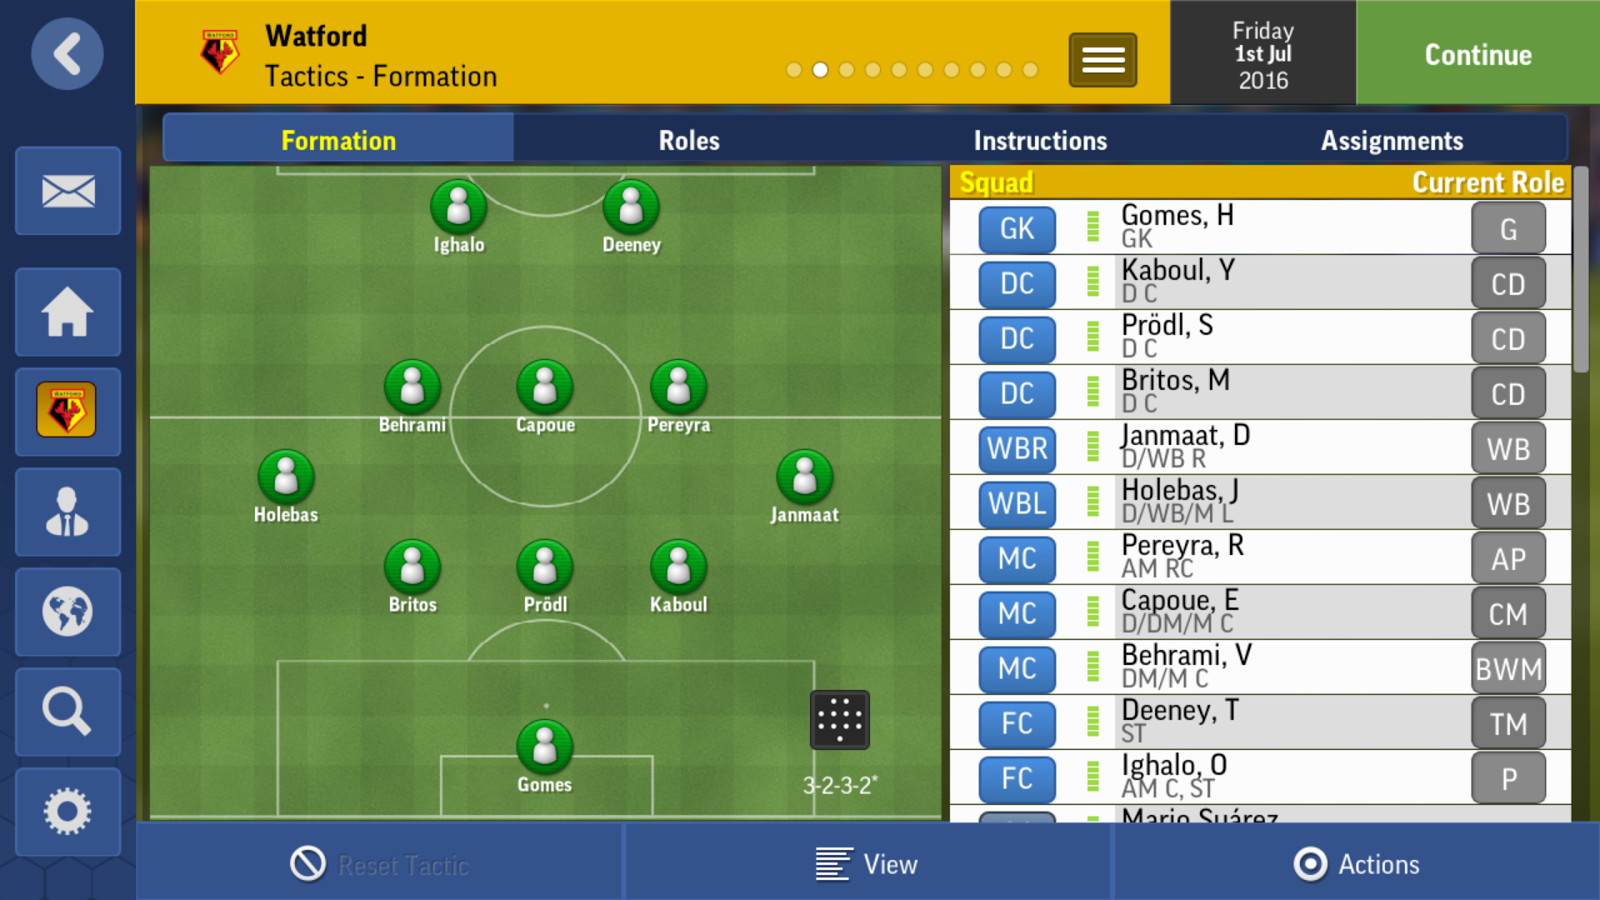 Football Manager 2023 & Touch was SIGames' most played title ever